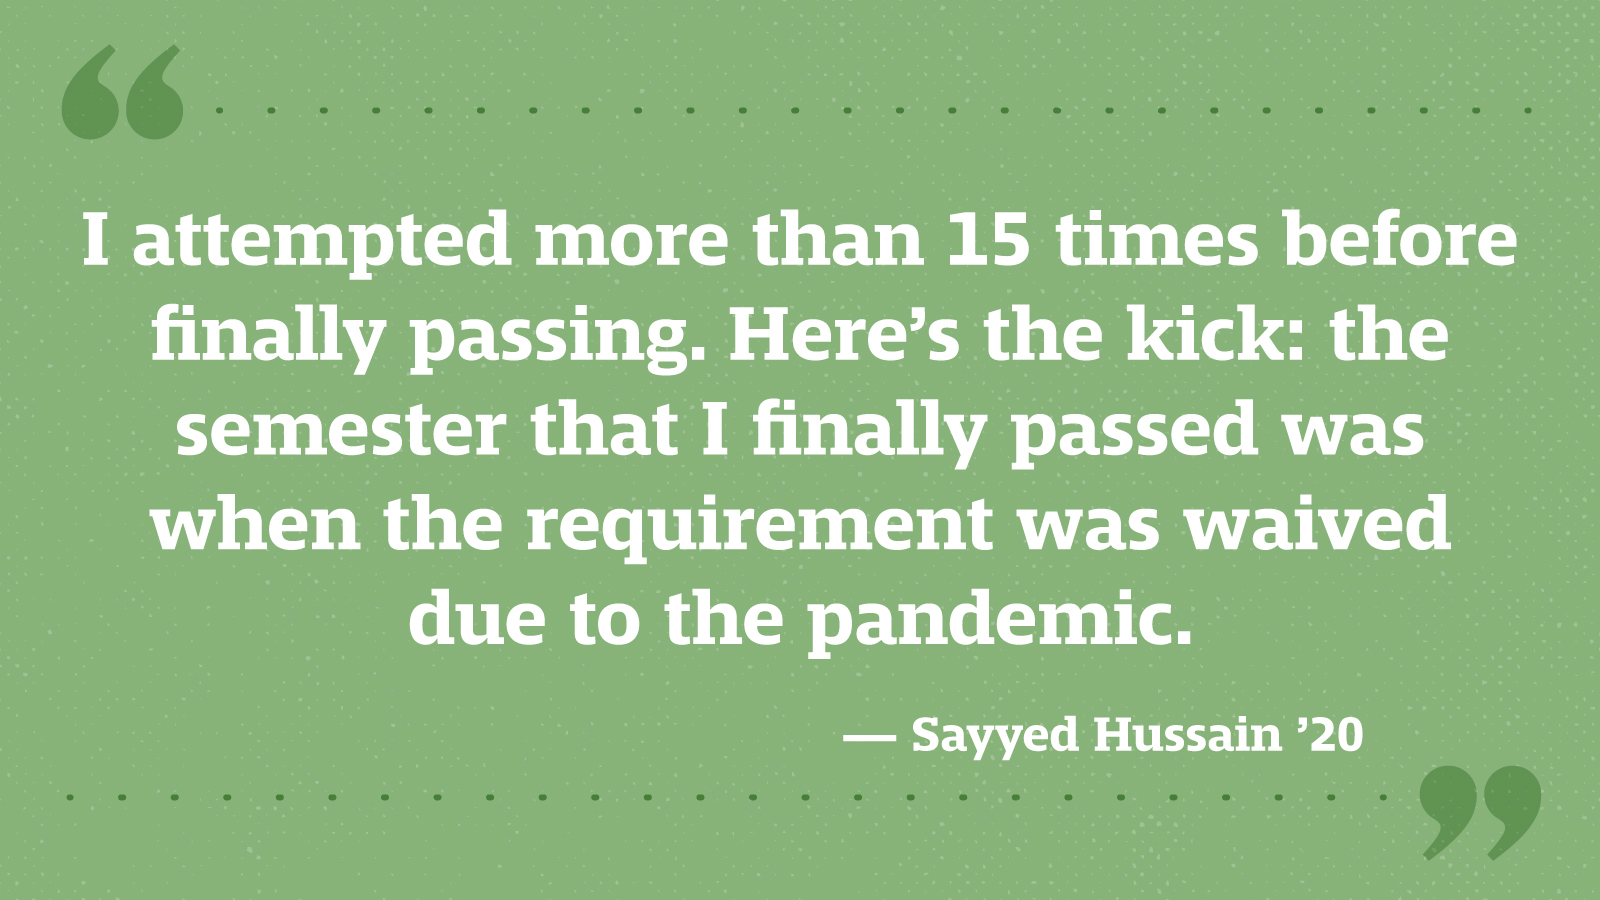 I attempted more than 15 times before finally passing. Here’s the kick: the semester that I finally passed was when the requirement was waived due to the pandemic. — Sayyed Hussain ’20